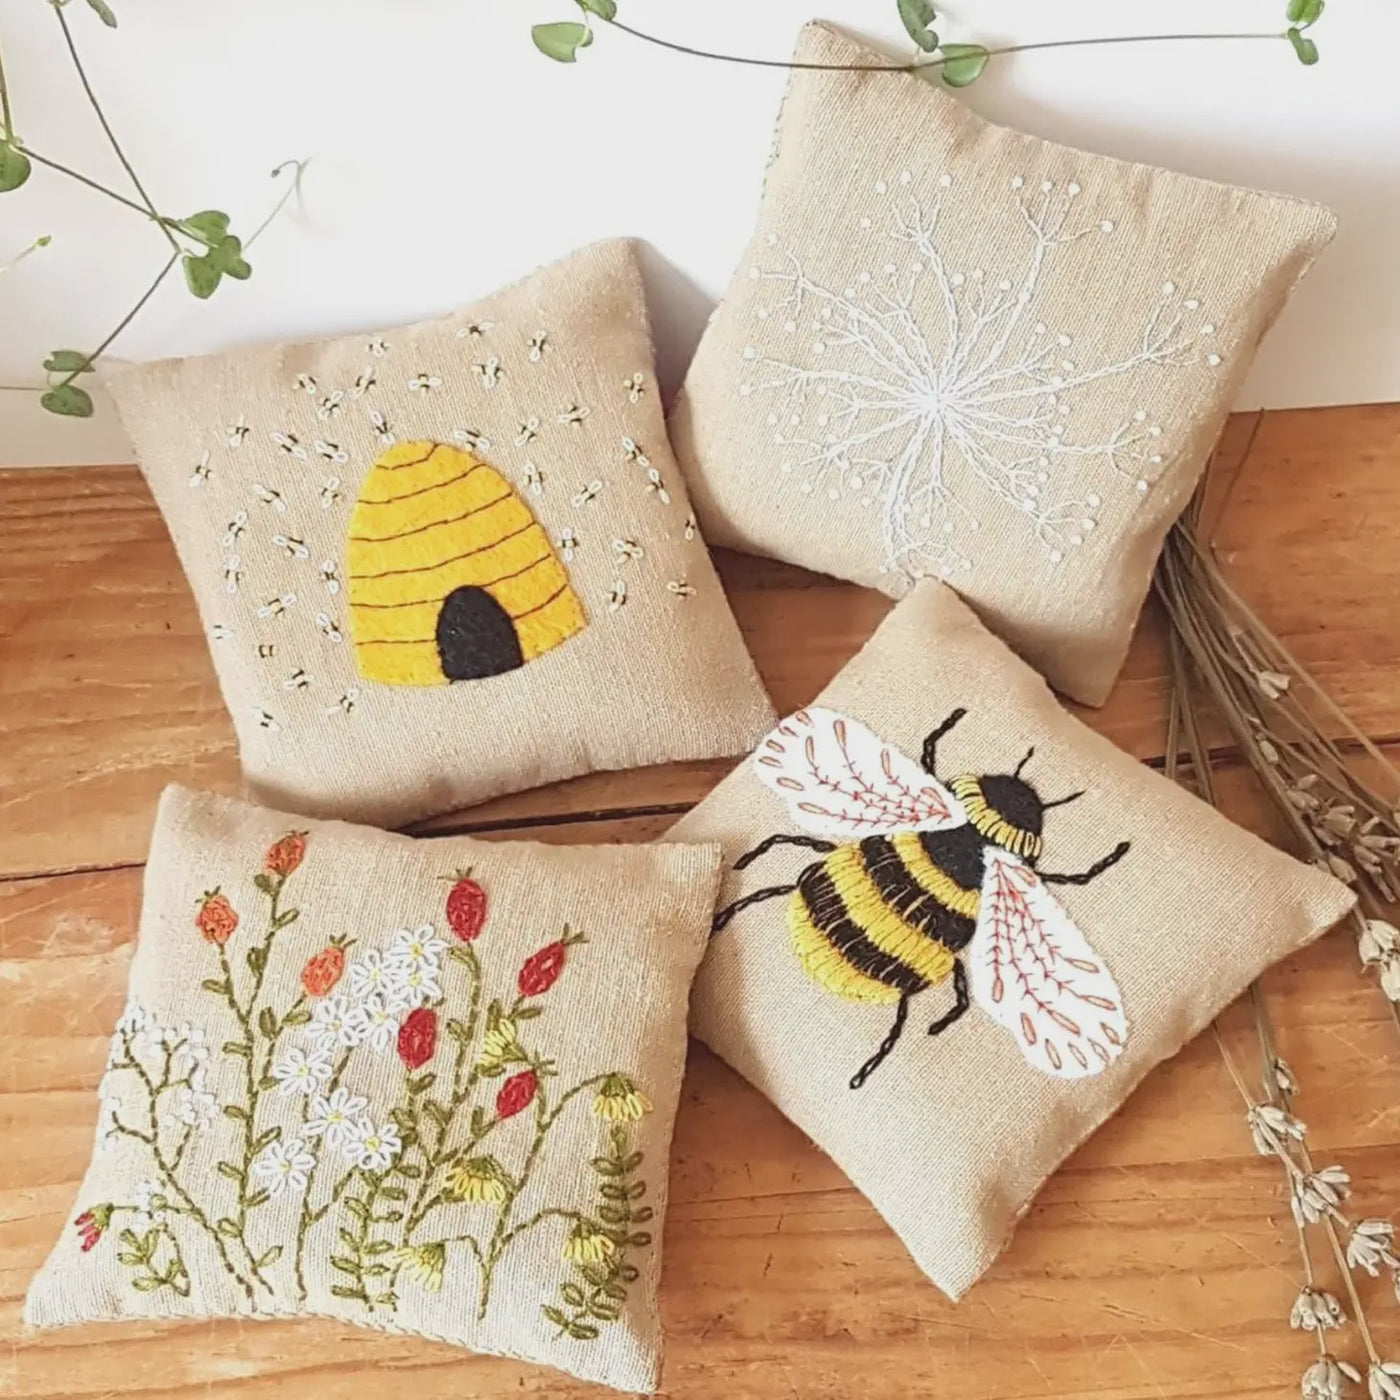 Linen Lavender Bags Embroidery Kit (Bees)